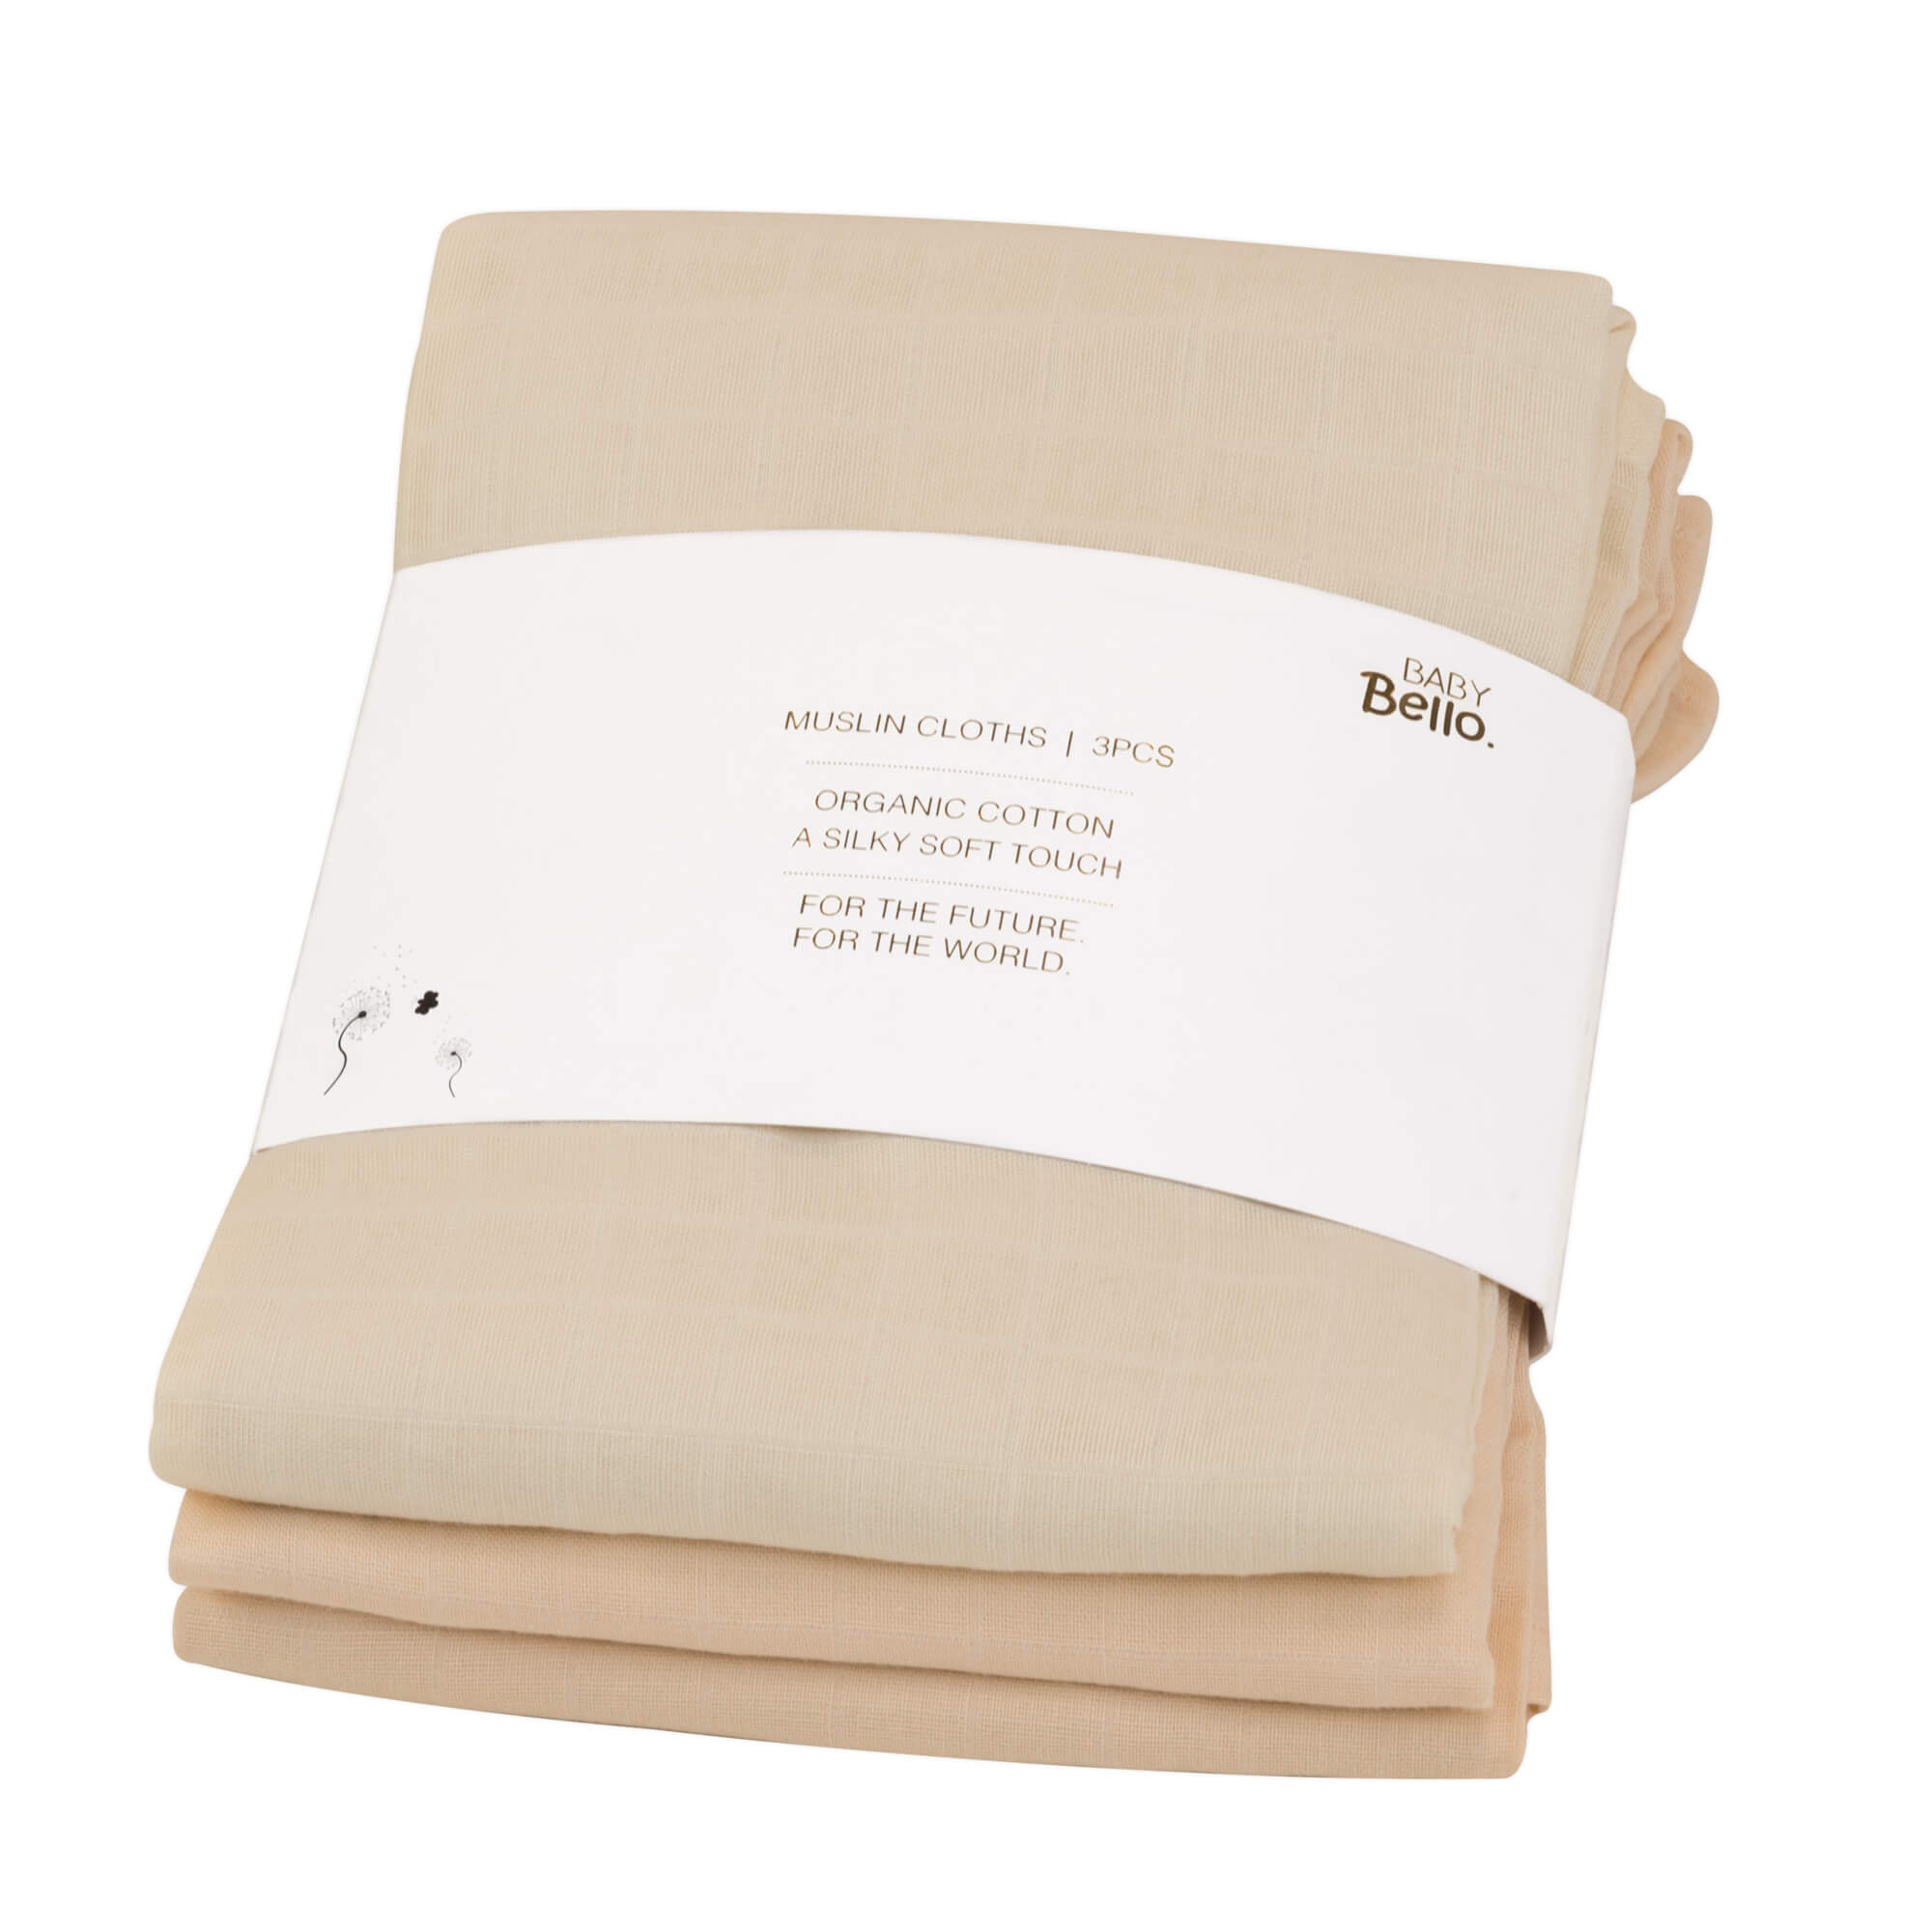 Baby Bello "Apricot Illusion: Soft Cloud-Like Baby Muslin Cloths for Your Little Love"